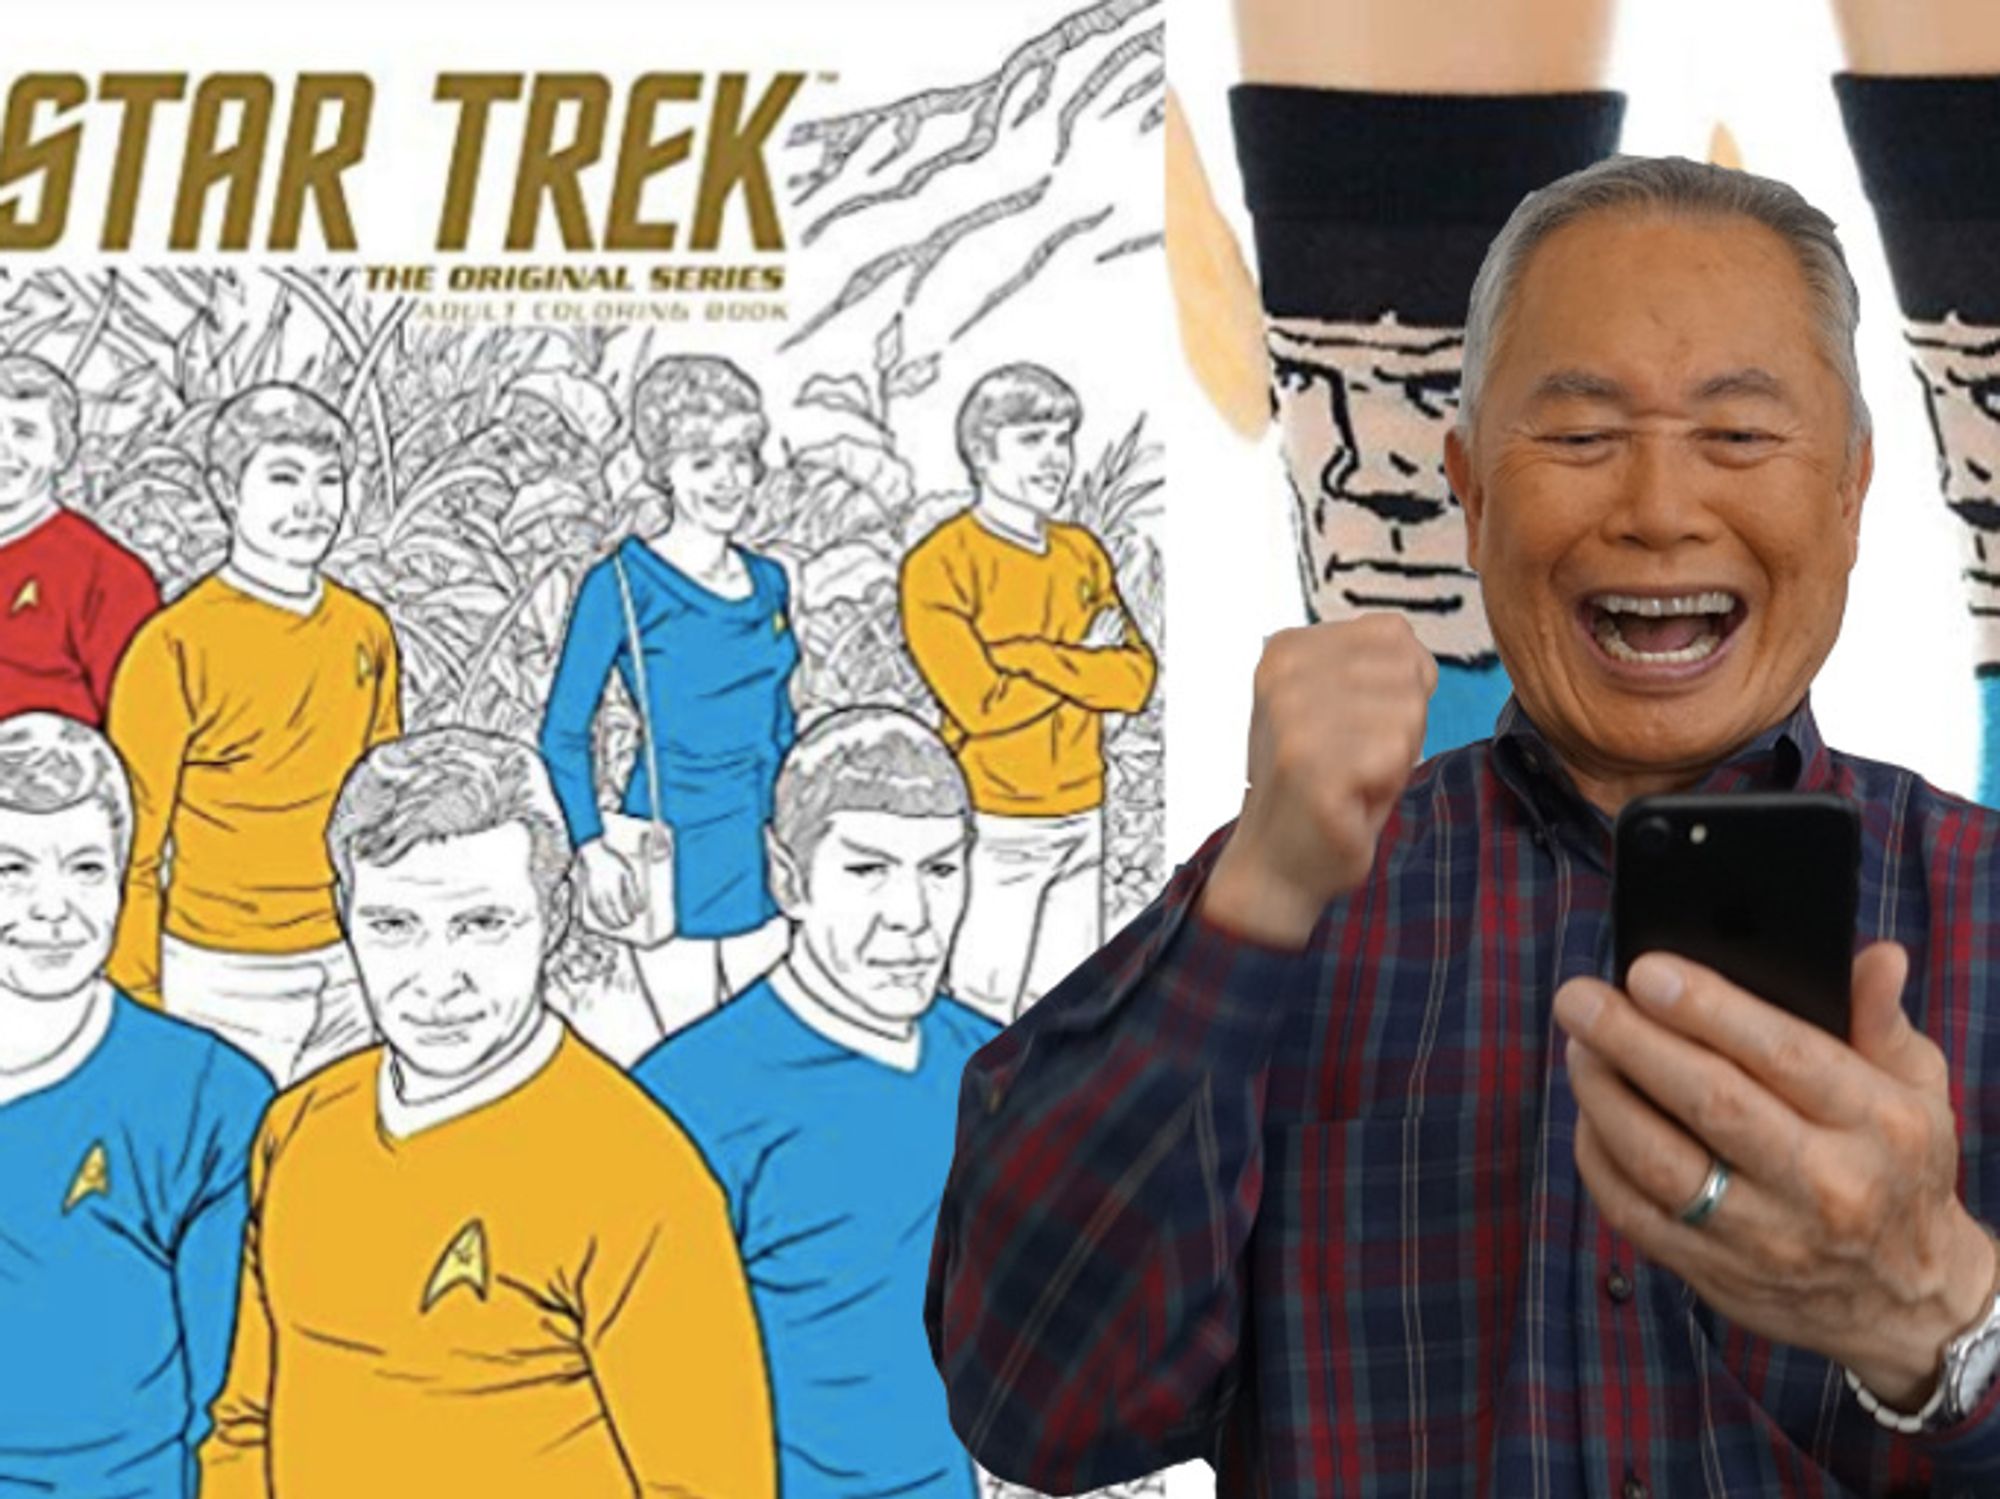 17 Star Trek gifts we want right now